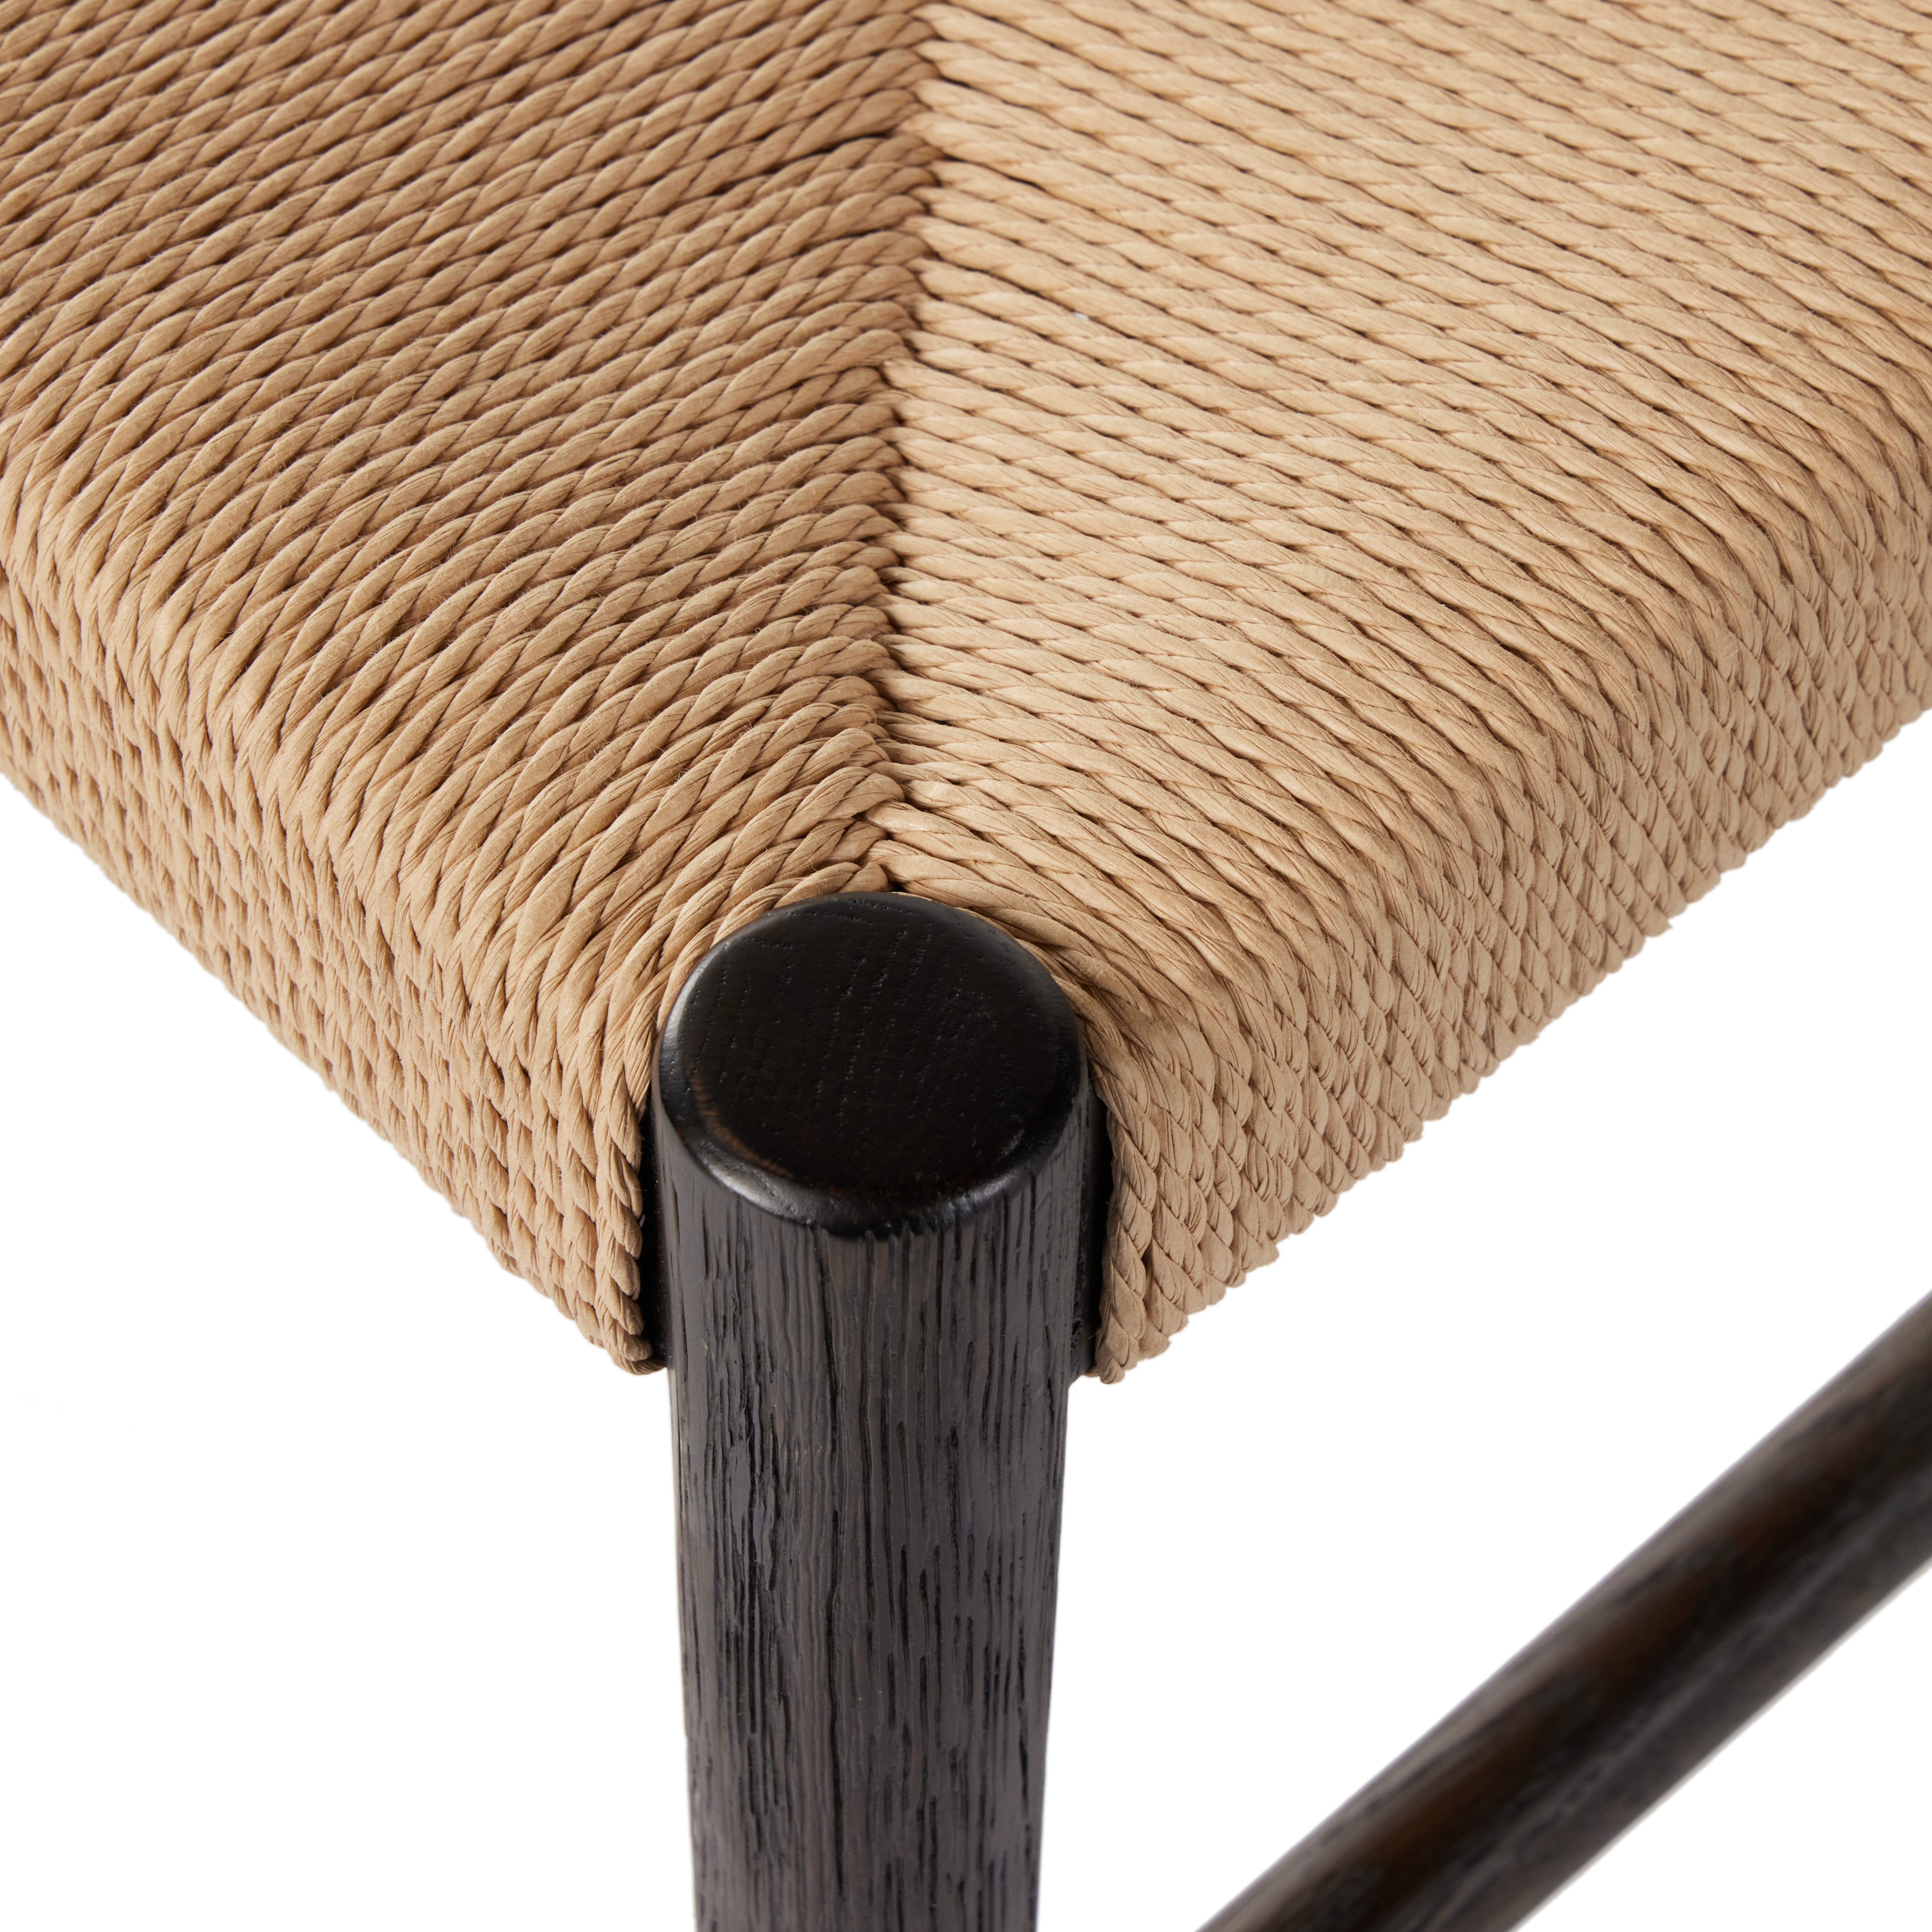 Glenmore Woven Dining Chair-Light Carbon - Image 2